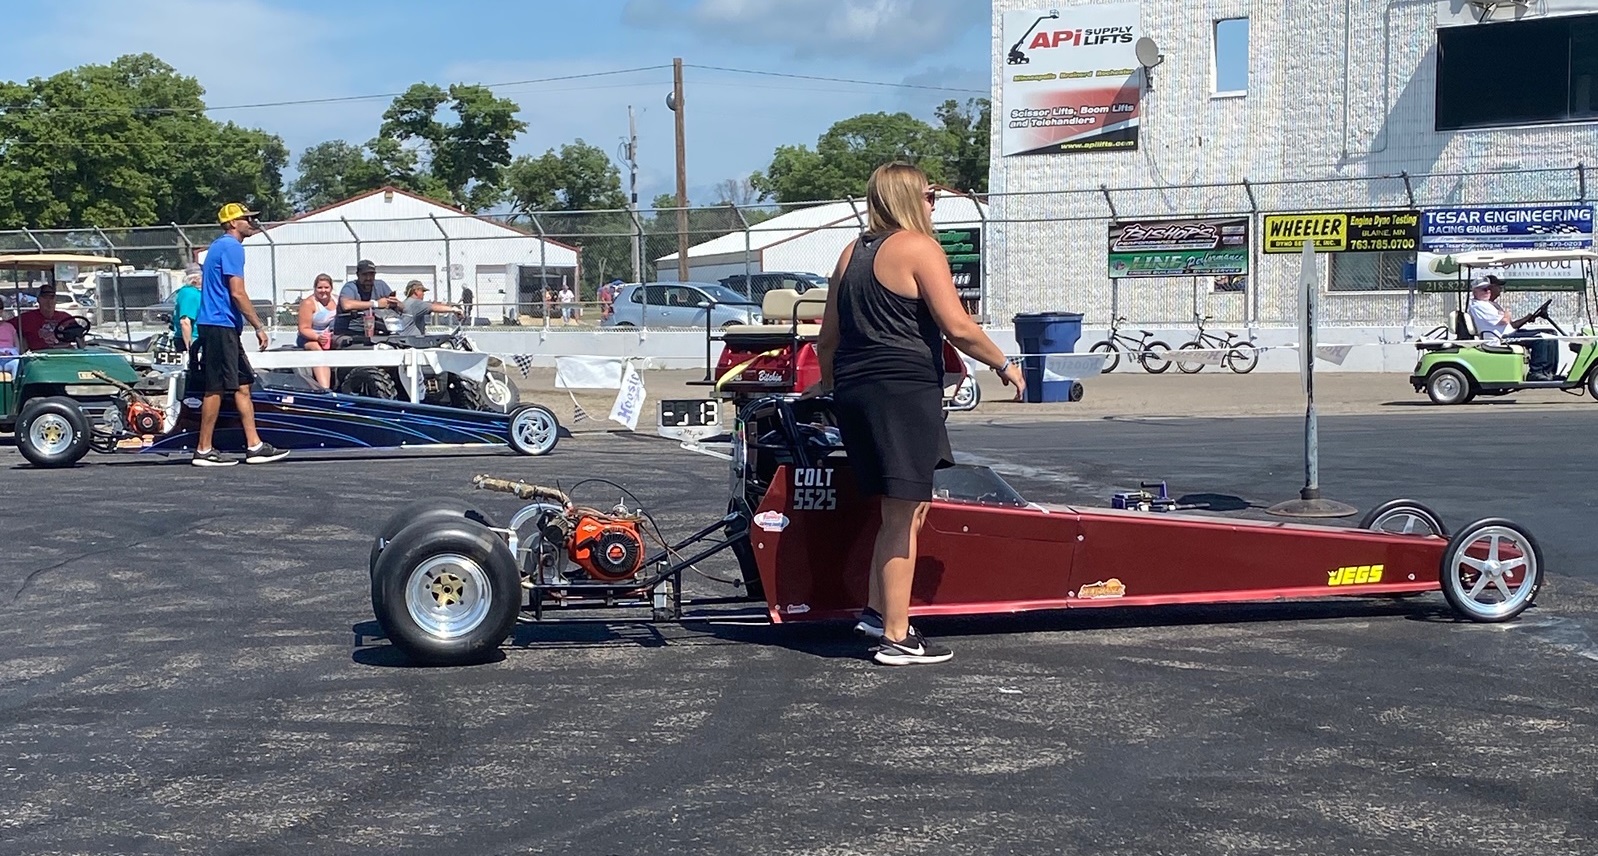 Junior Dragster Racing - Colt and Bodie Carlson - parents Shawn and Heather